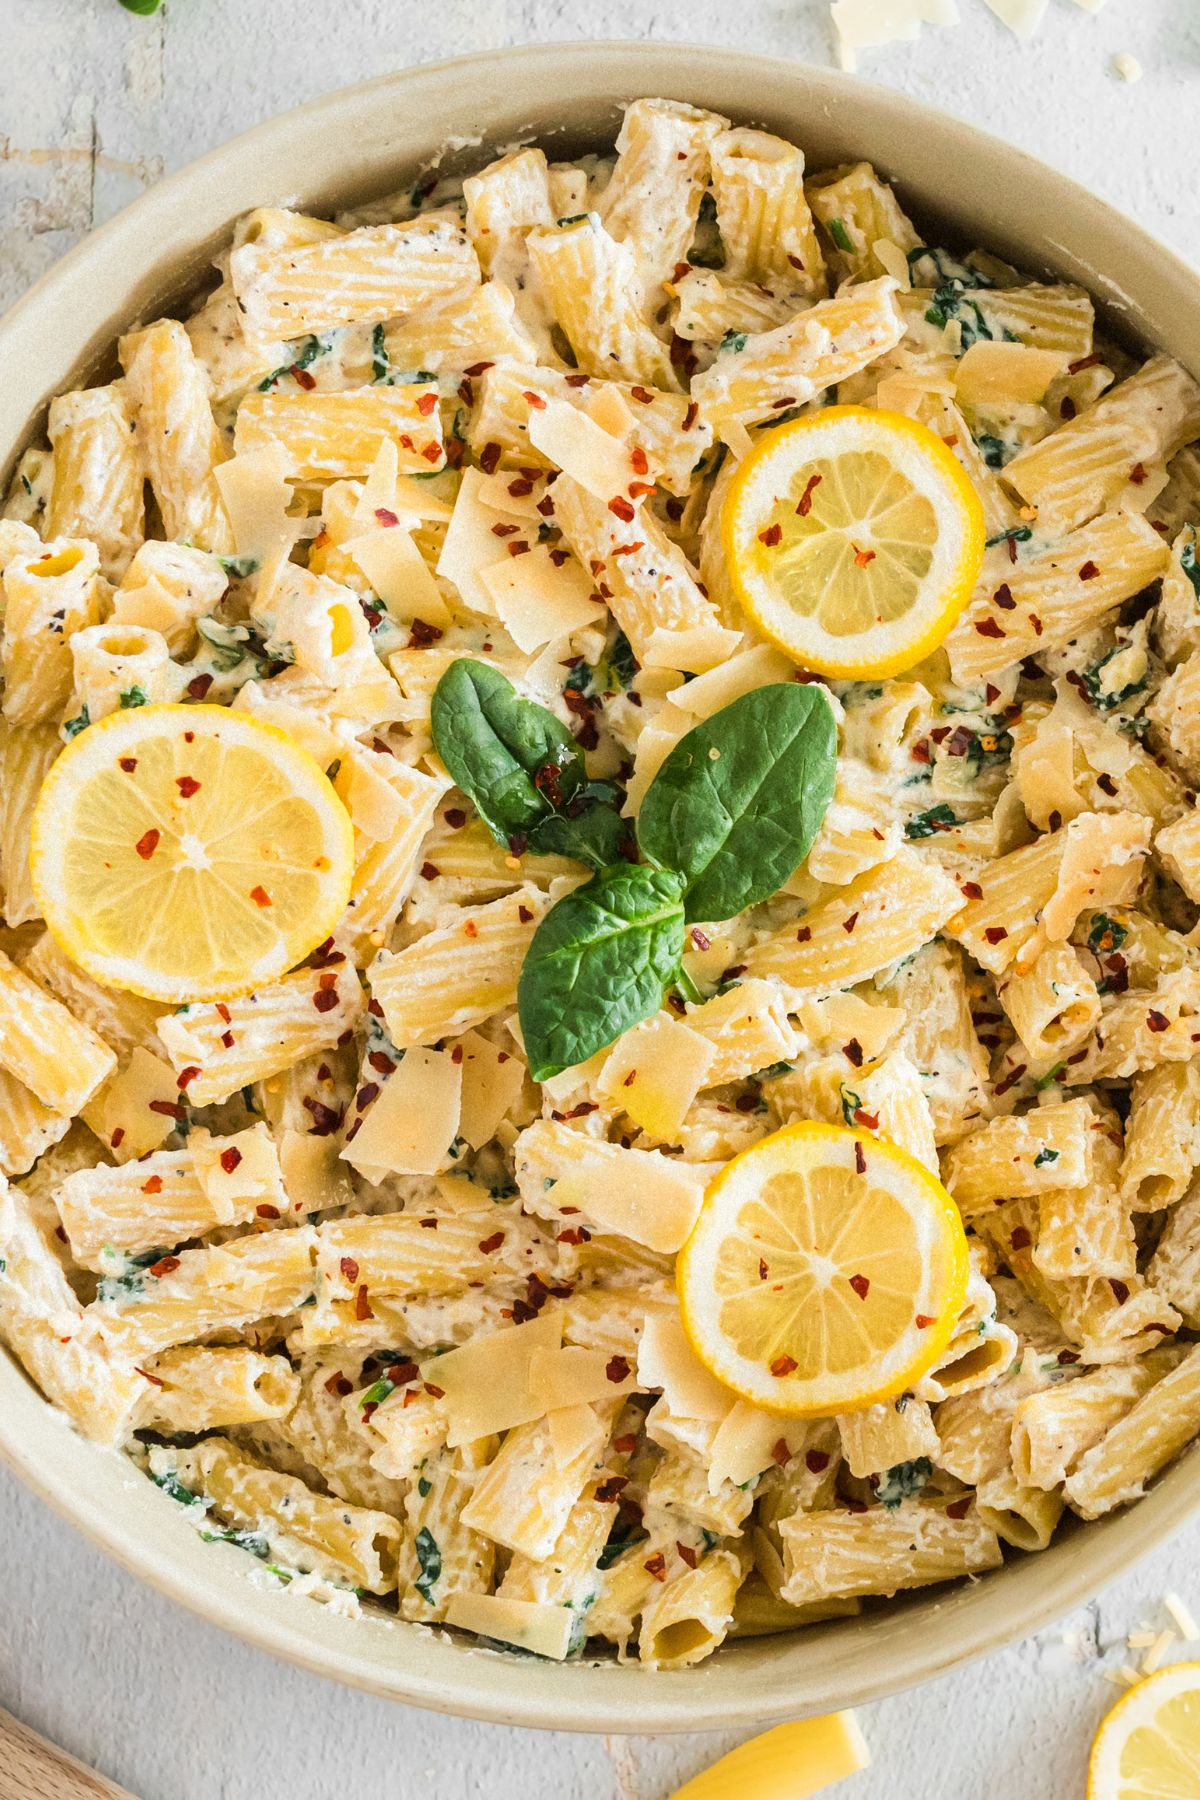 Looking down on a bowl of Lemon Ricotta Pasta.